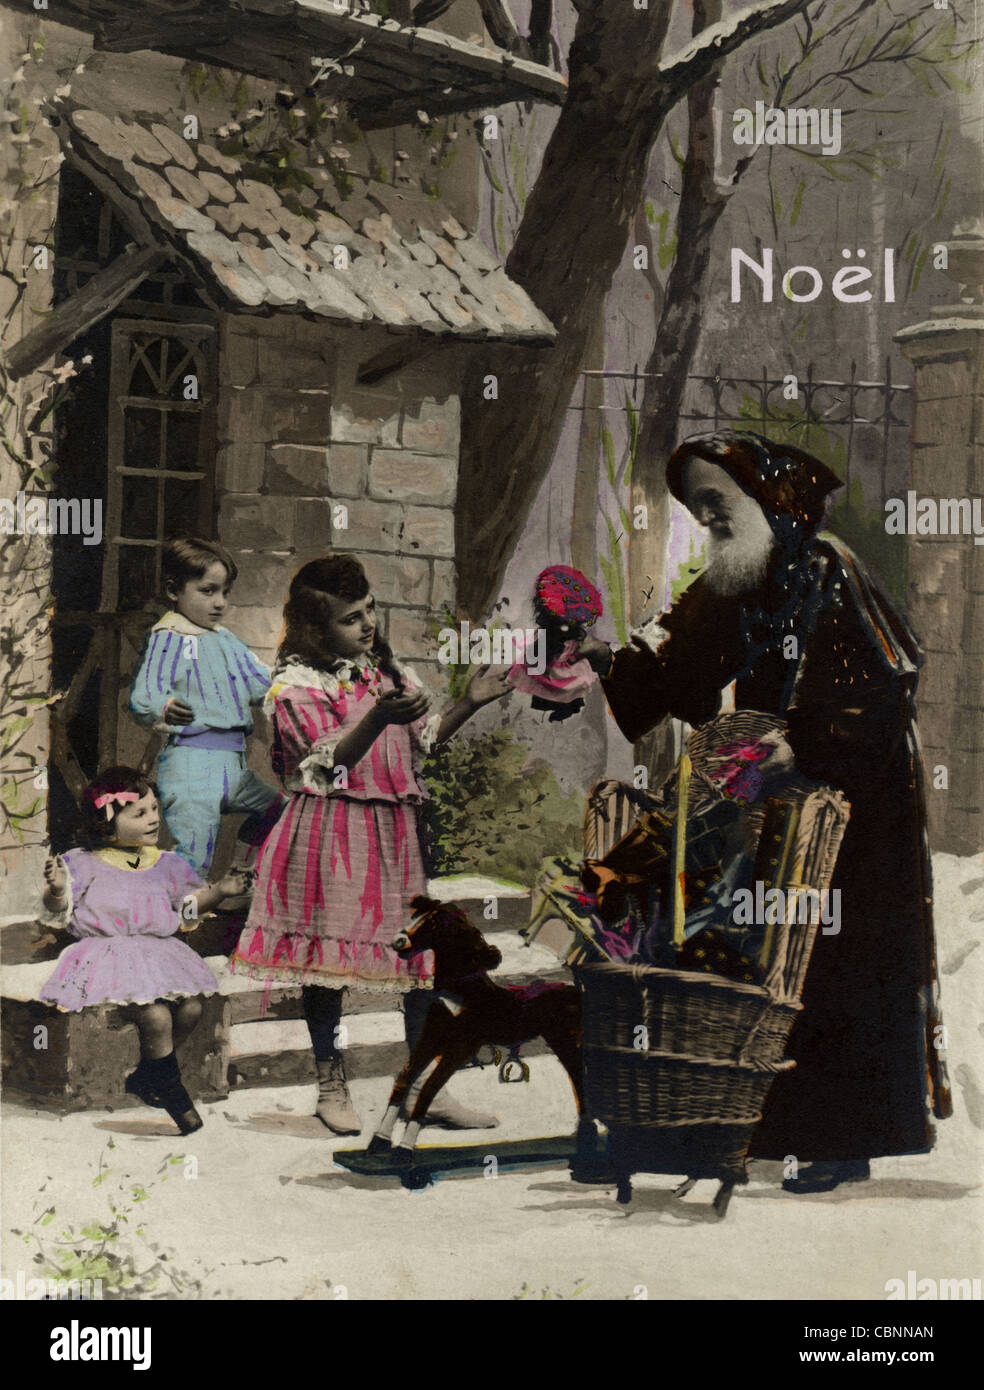 Santa Claus Handing Out Presents to Three Children Stock Photo